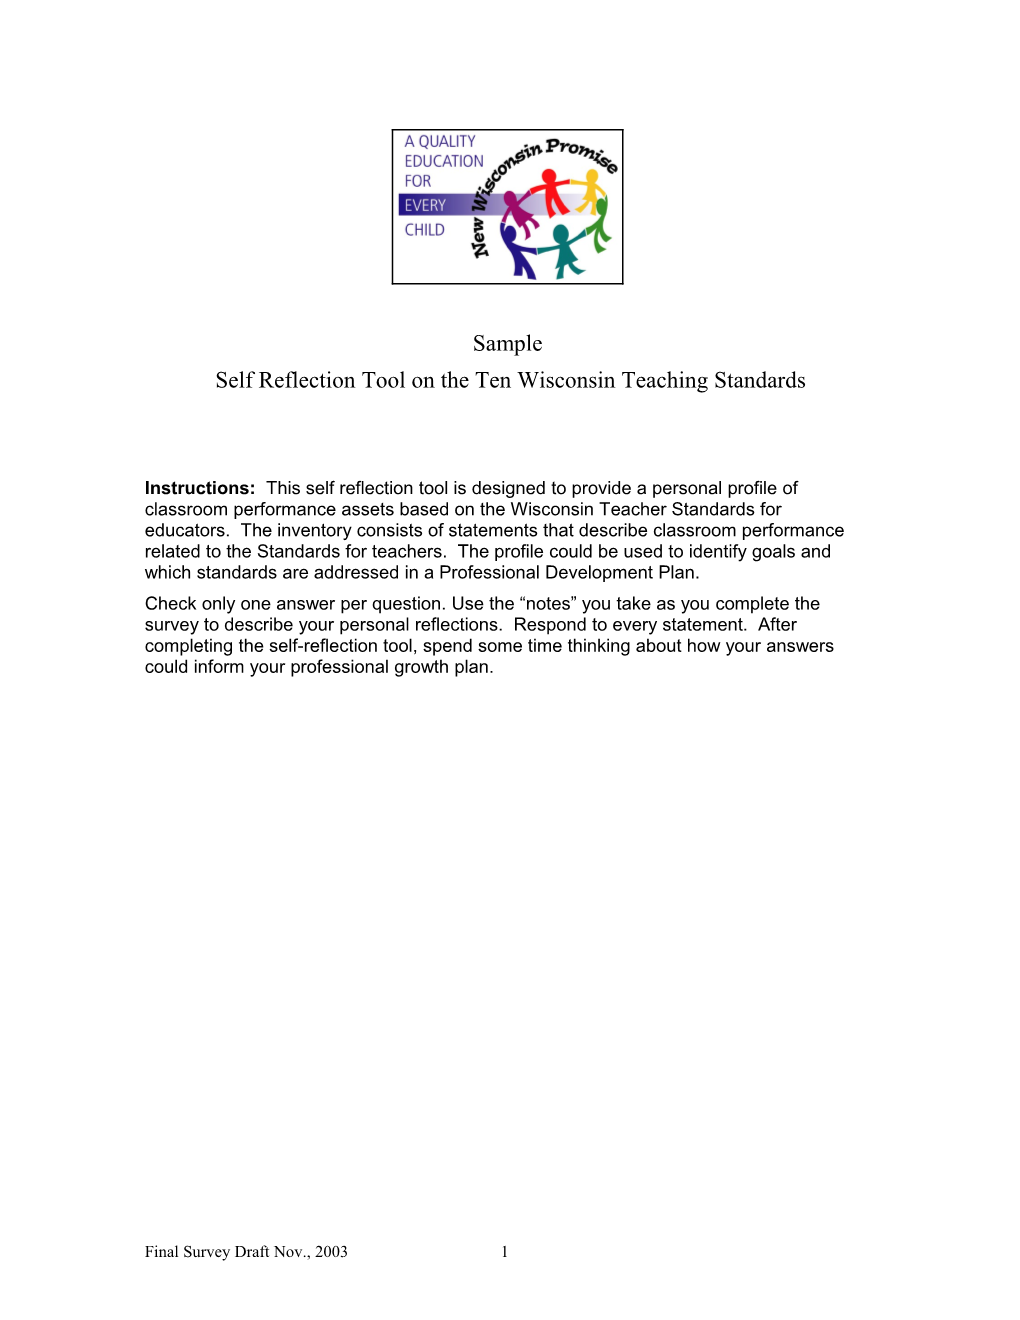 Self Reflection PDP Tool for Teachers